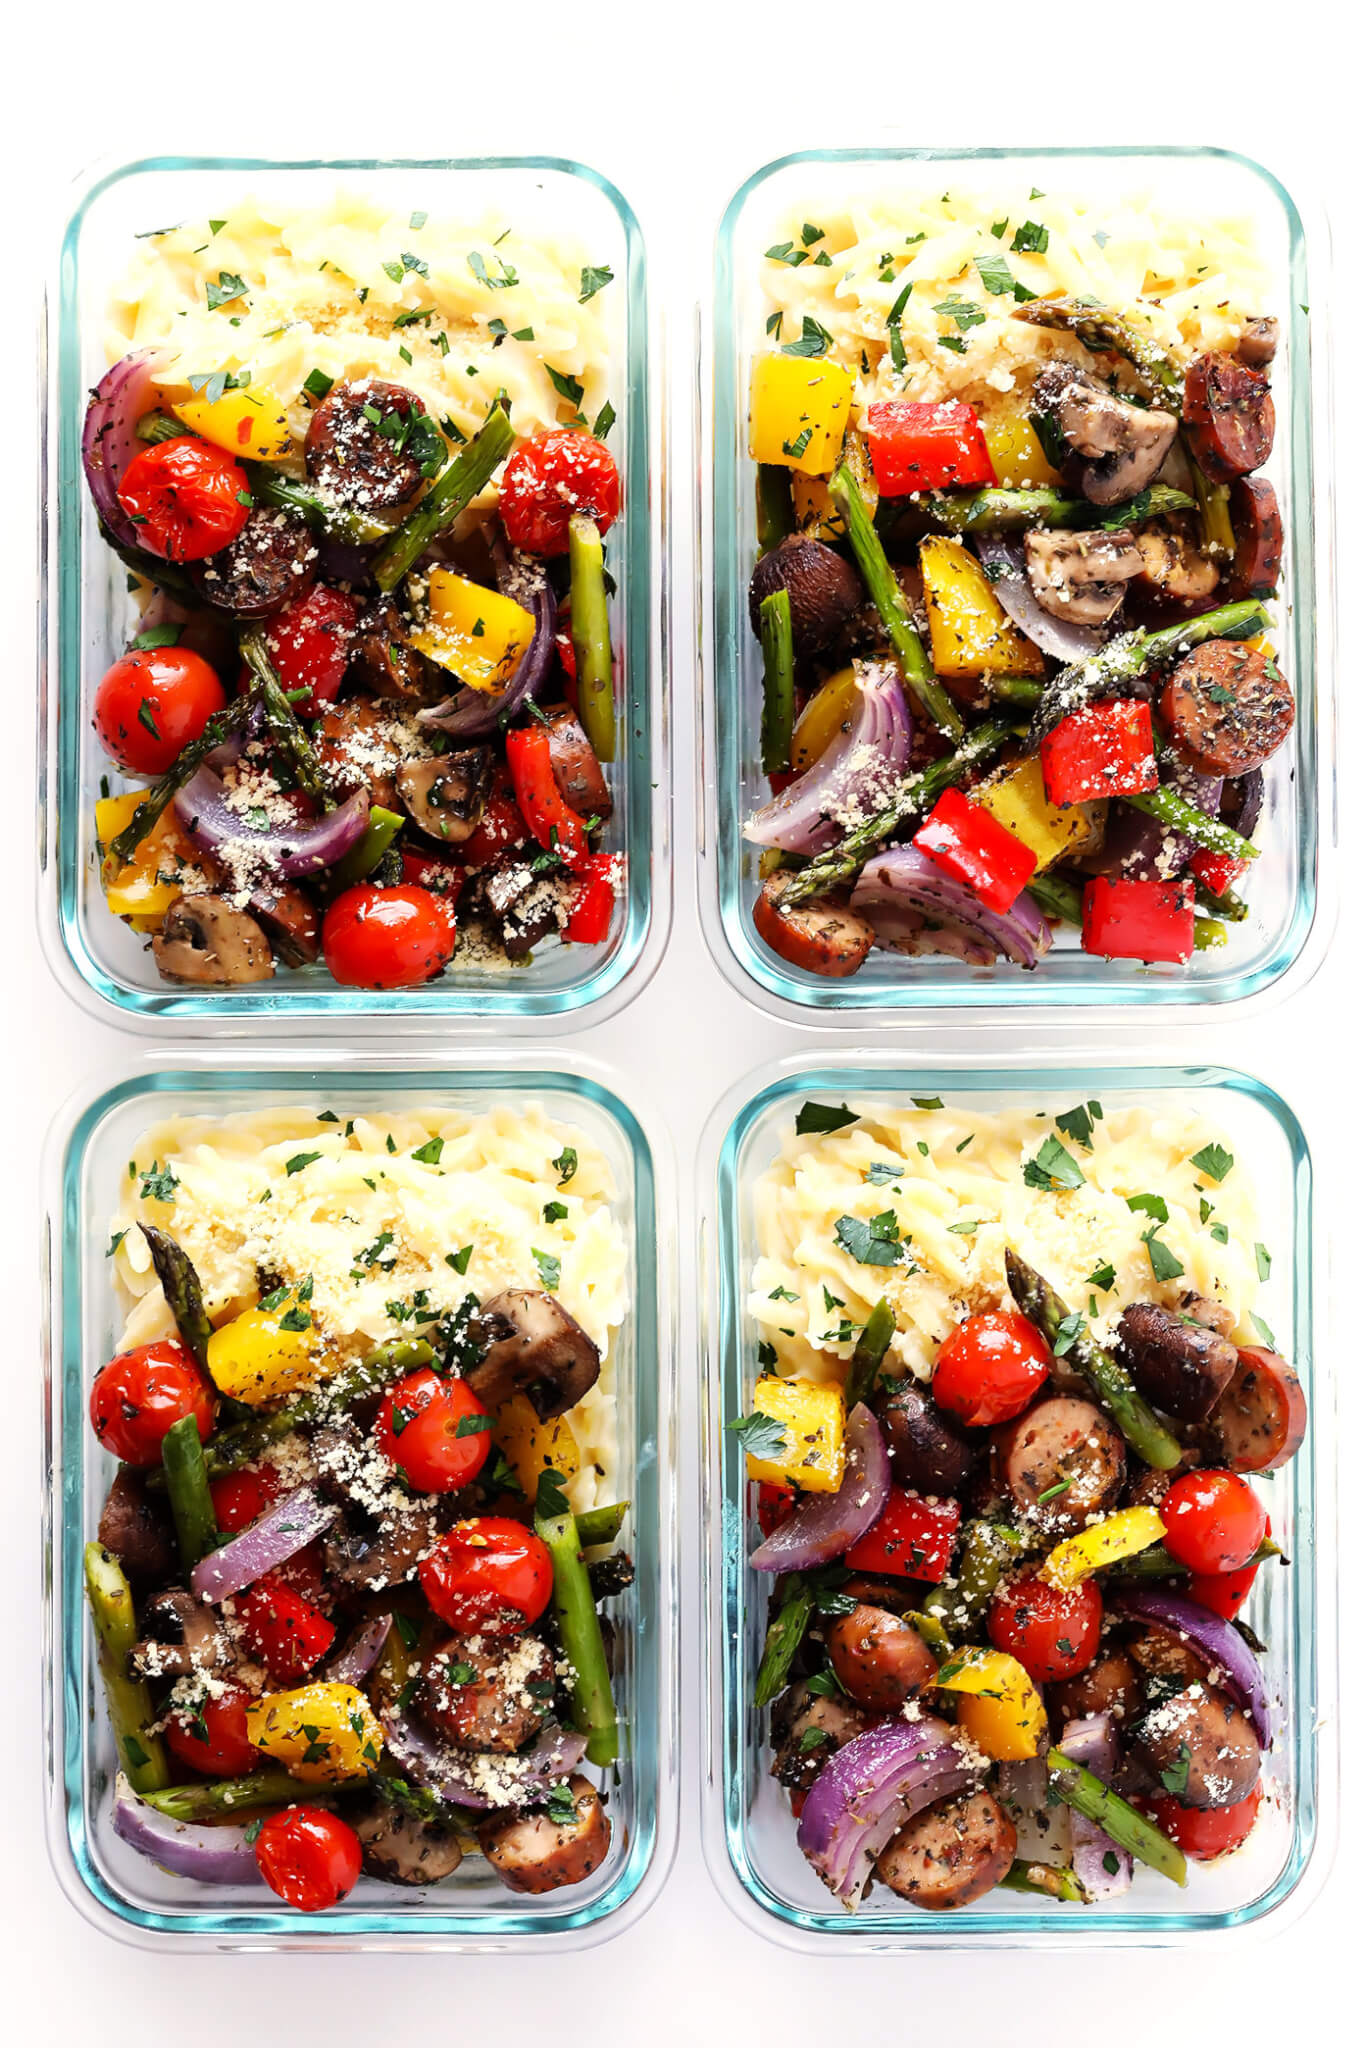 LOVE these Italian Sausage and Veggie Bowls! They're made with Italian roasted vegetables (such as tomatoes, asparagus, peppers, onions, mushrooms), paired with Parmesan Garlic Orzo Pasta, and perfect for easy lunch or dinner meal prep. So delicious! | gimmesomeoven.com